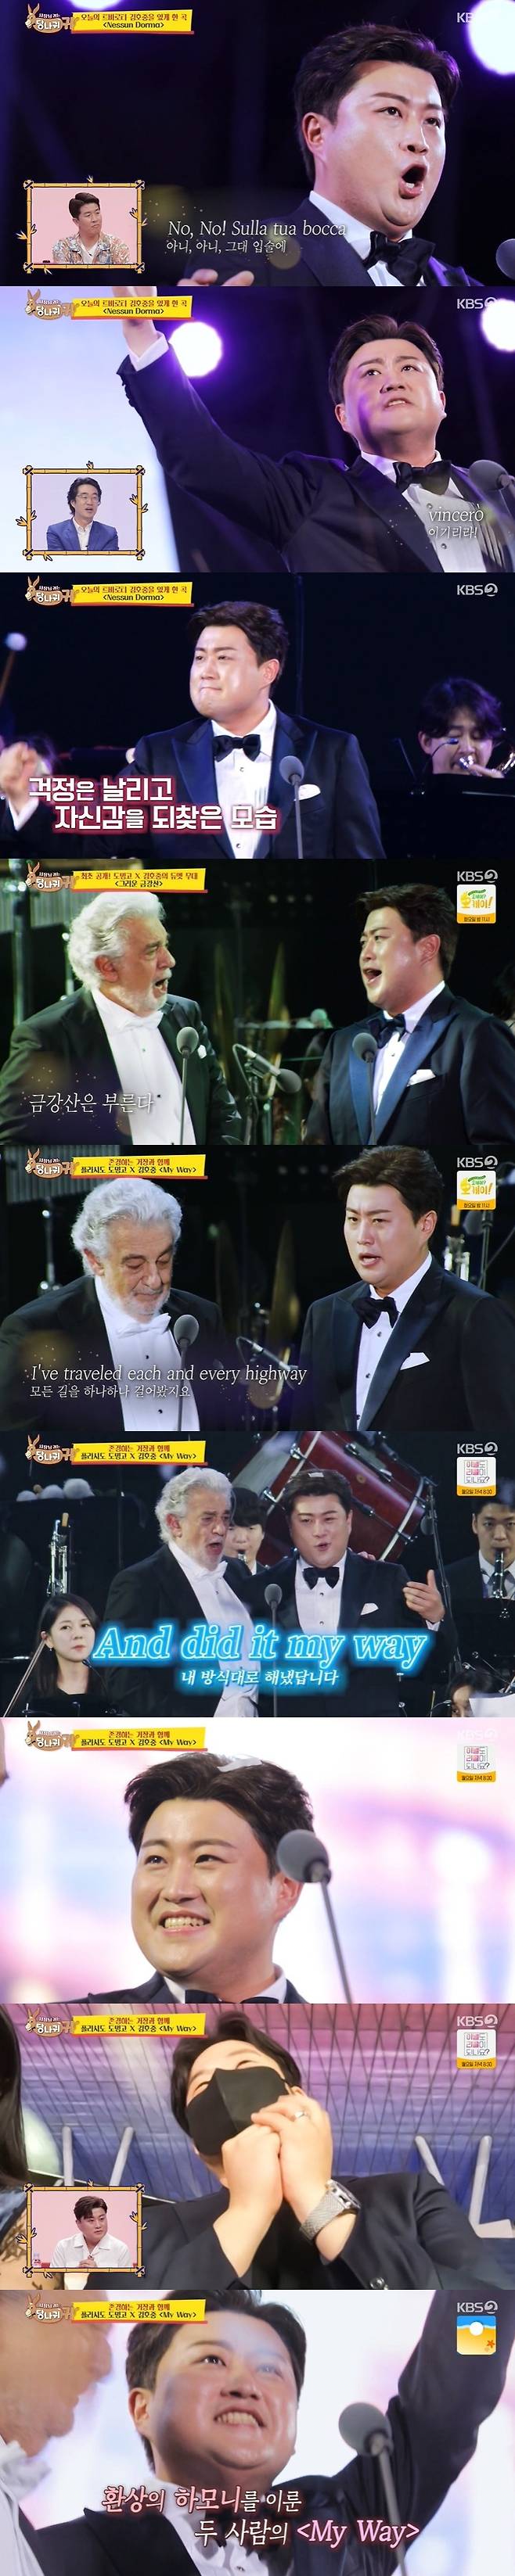 Seoul = = Vocalists Kim Ho-joong presented the performance Jeonyul as it is in the first row of the house room.KBS 2TV Boss in the Mirror, which was broadcasted at 5 pm on the 31st, featured Vocalists Kim Ho-joong showing the fantastic Duets stage with Worlds three tenors, Placido Domingo.Kim Ho-joong was invited as a guest to the performance of Placido Domingo and came to the stage together.Kim Ho-joong took quite a lot of solo songs and two Duets songs with Placido Domingo.Kim Ho-joongs fans flocked to the scene like a cloud, and in fact, the performance of Placido Domingo led to the sale of the first two minutes of the previous performance.Kim Ho-joong said, I know that my fans bought a lot of tickets. However, the fans promised not to come wearing Kim Ho-joong Goods T-shirts themselves, but it was basic manners and I am really proud of that. On this day, the show featured Vocalists Kim Ho-joong, not Trot singer Kim Ho-joong.Kim Ho-joong, who sings in a magnificent sound while wearing a suit, was fresh itself.In addition to Kim Ho-joongs solo stage, which informed him of his unique charm, he and Domingos Duets stage overwhelmed viewers in that it was a harmonies that can not be seen anywhere.The World tenor stage was faced on the terrestrial wave, and the figure of Kim Ho-joong who performed vocal music was added to the jeonyul.Kim Ho-joong had a hard time with the bad vocal cords and the stage costumes that did not arrive ahead of the performance with Domingo.However, Kim Ho-joong finished the solo stage for the first time safely, and successfully finished the stage by raising the treble successfully in the Nesun Dorma.Domingo also gave a big applause to Kim Ho-joongs stage.The stage that followed was the Duets stage with Domingo, who sang the Duets song together, keeping an eye on Kim Ho-joong.Kim Ho-joong ended up weeping as she finished her last stage, the Duets song, because it was a dream stage.Kim Ho-joong said, I got a lot while singing with Domingo, he said. I learned what kind of mind I should have while singing in the future.Domingo told me to look at my eyes, he said. Then I can follow you and you can follow me. He informed me that he had a great enlightenment in his future song life.When Kim Ho-joong and Domingos performances ended, fans cheered Encore.Kim Ho-joong said while watching VCR, Im wobbly even if I look back now.Domingo said to Kim Ho-joong in the waiting room after the stage, It was a really good stage, and suggested, Lets try it together with Duets next time.Kim Ho-joong said of the stage with Domingo in the studio, Just as Mr. Domingo challenged pop songs, I want to show Kim Ho-joong singing, not sharing trots with Vocalists.